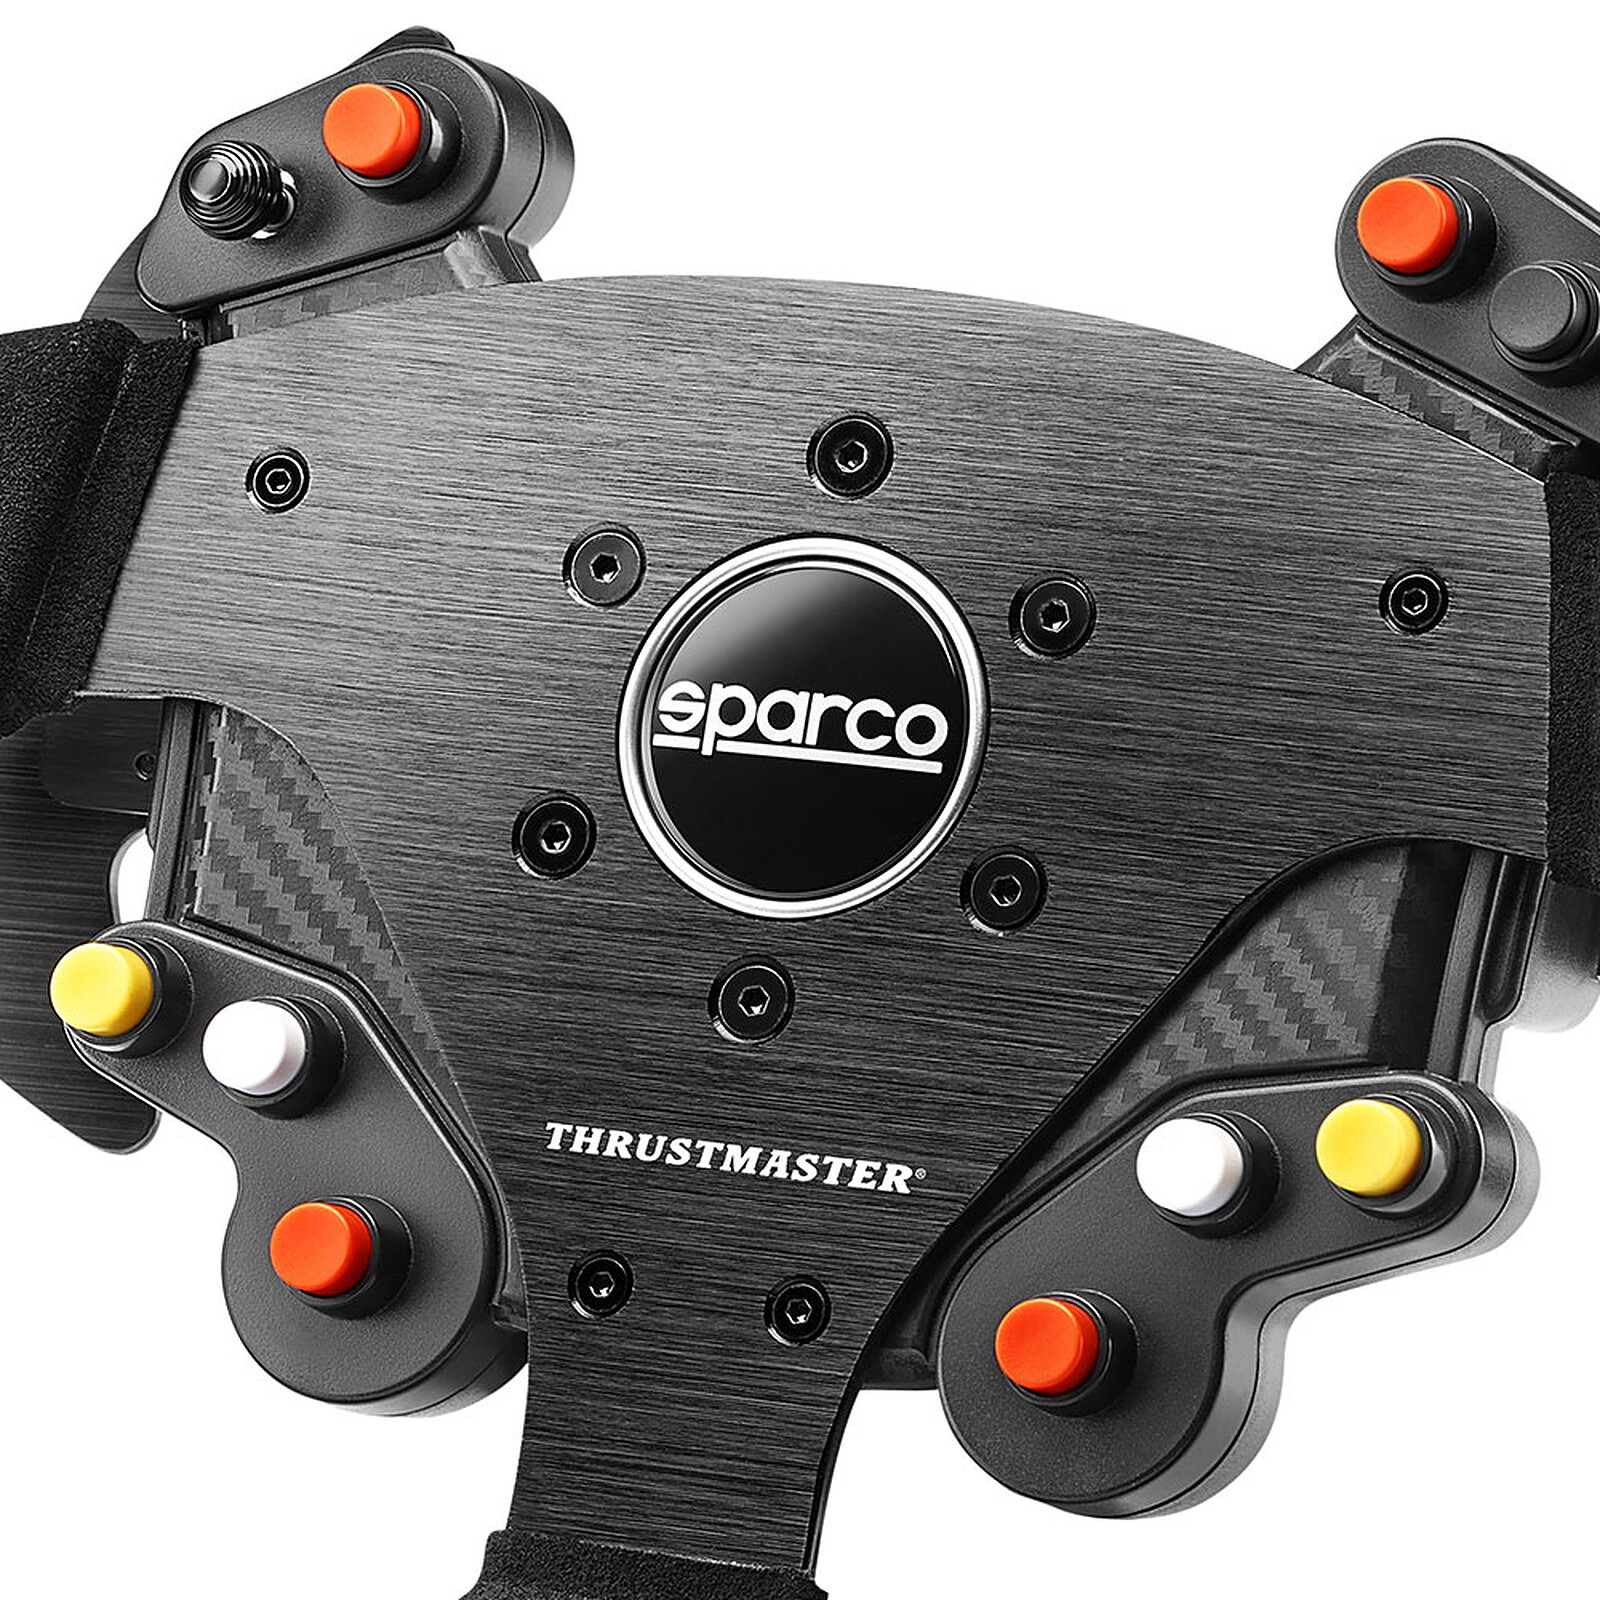 Thrustmaster Rally Wheel Add-on Sparco R383 Mod PC game racing wheel  Thrustmaster on LDLC